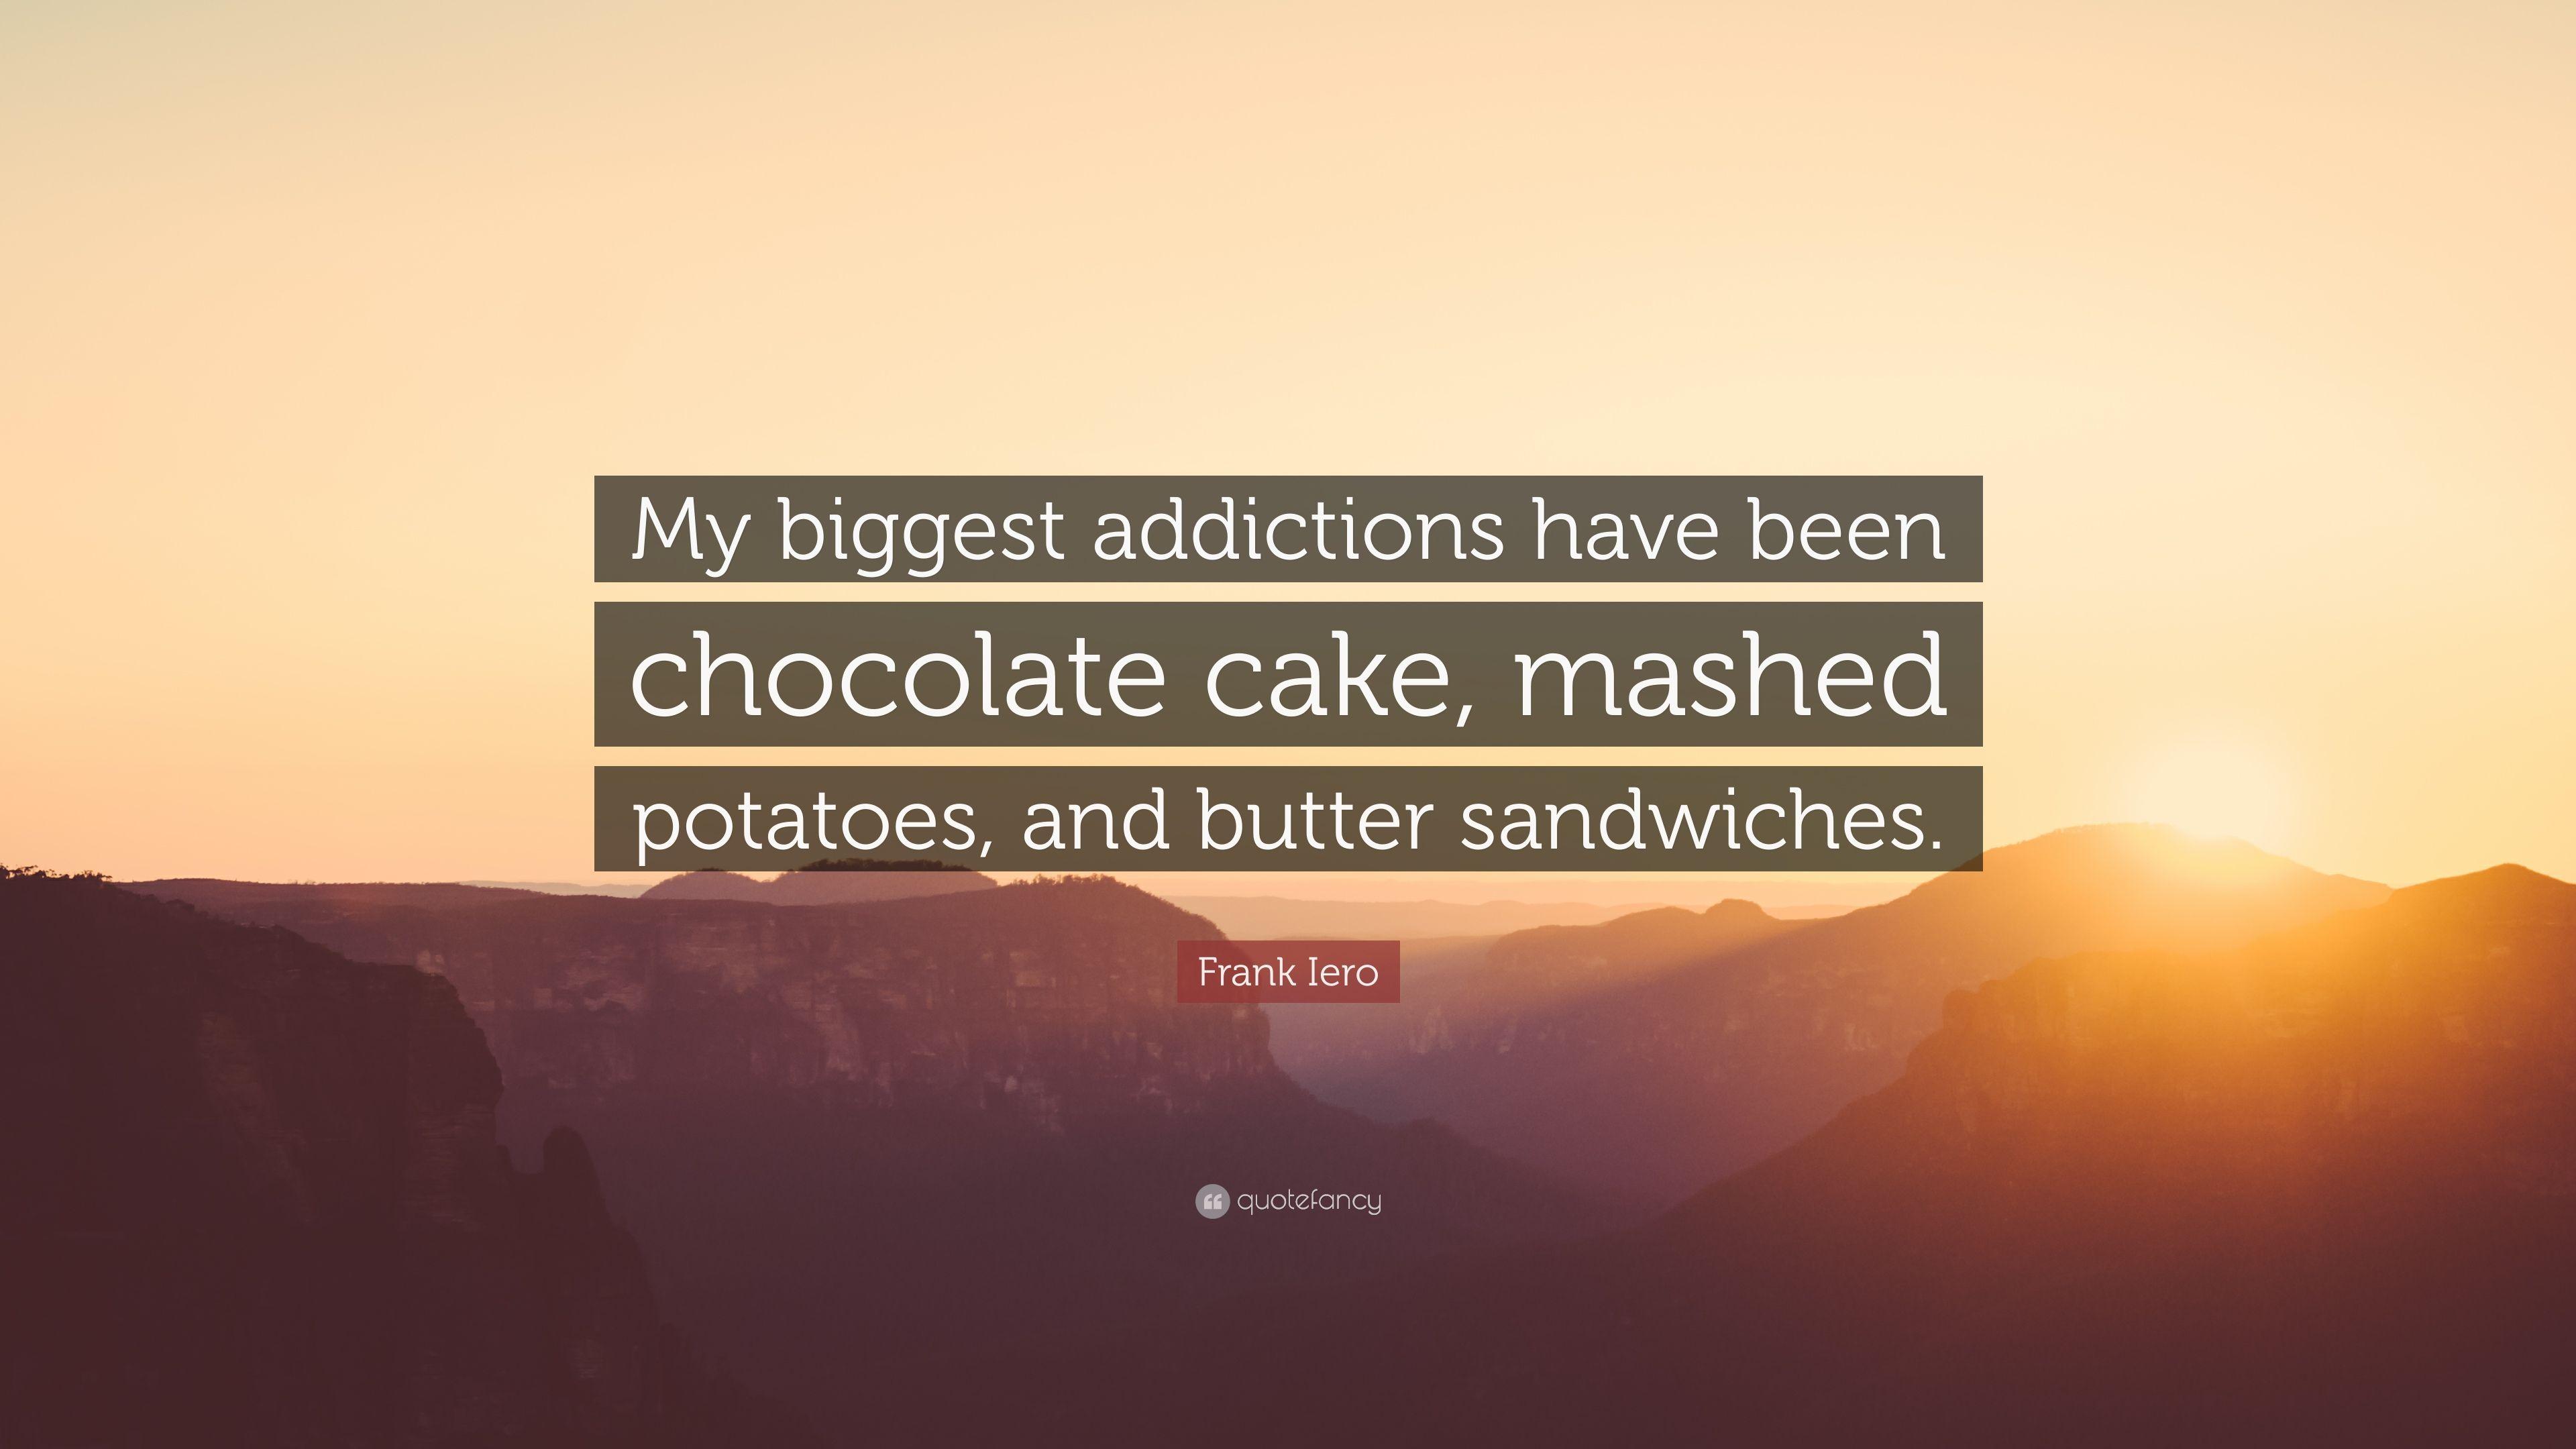 Frank Iero Quote: “My biggest addictions have been chocolate cake